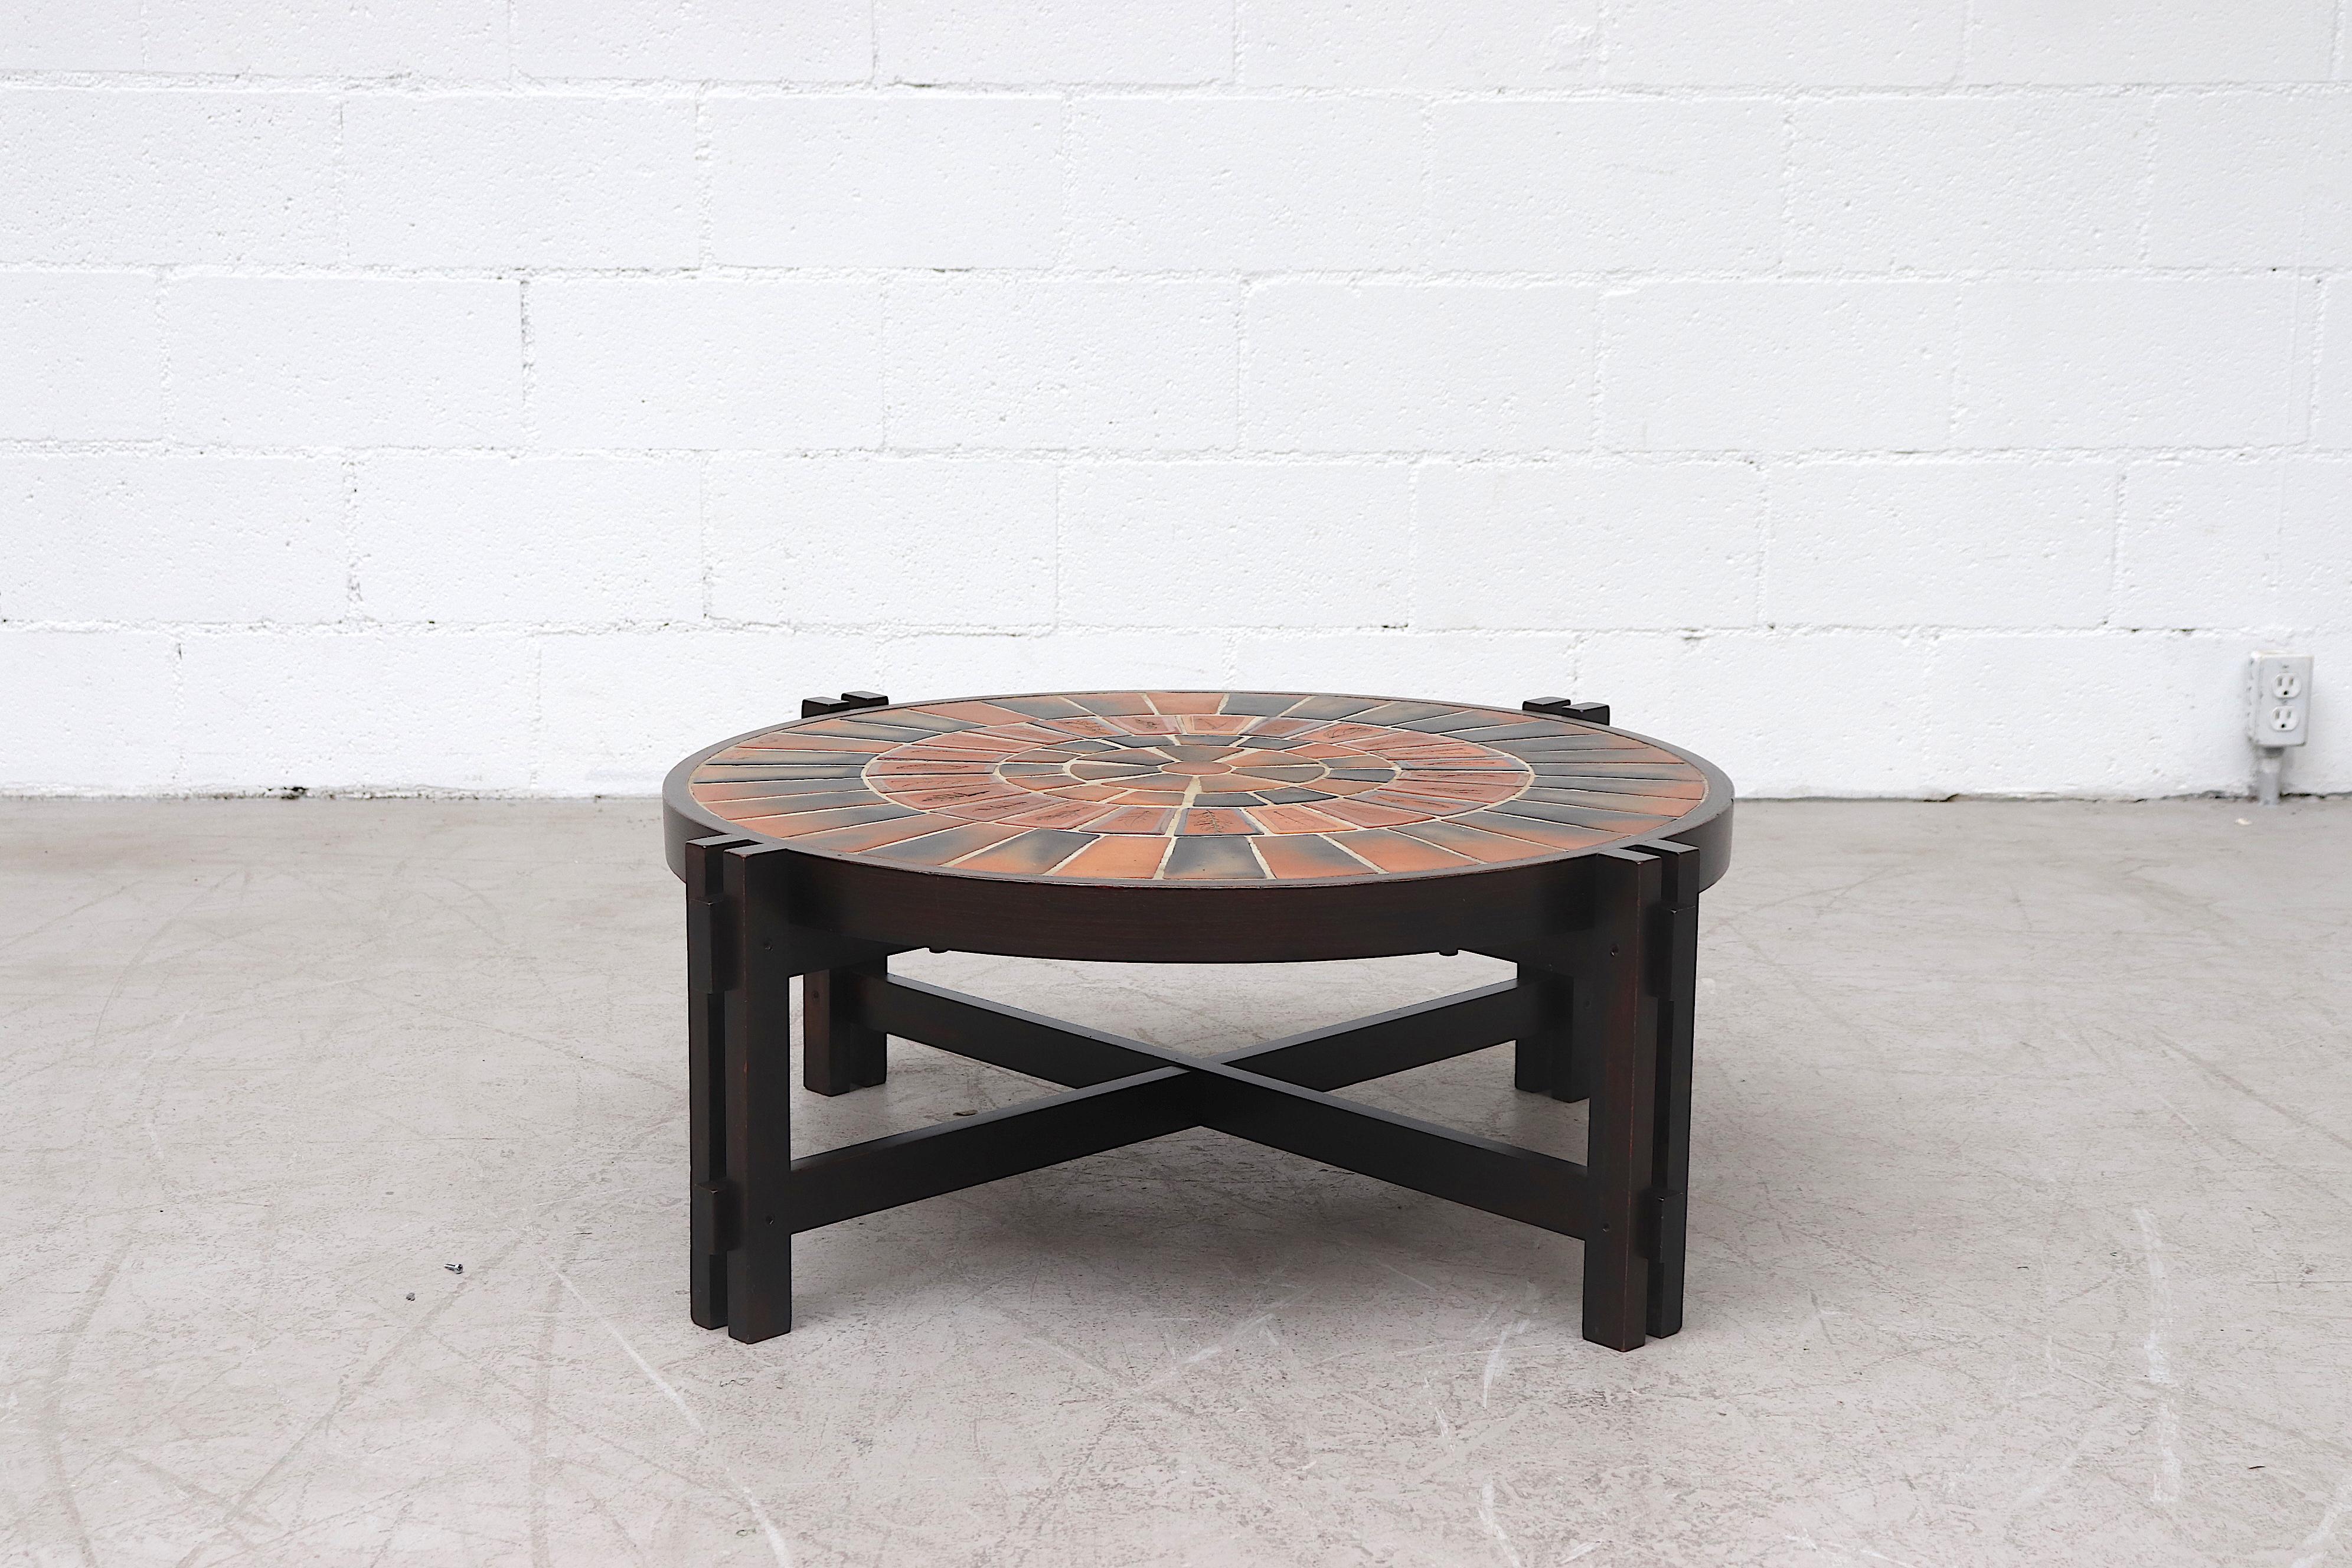 Roger Capron 'Garrigue' low round wood framed tile relief coffee table with exquisite pressed leaf tile work from Vallauris, France. Lightly refinished in impressive condition with light wear and some scratches to ceramic.